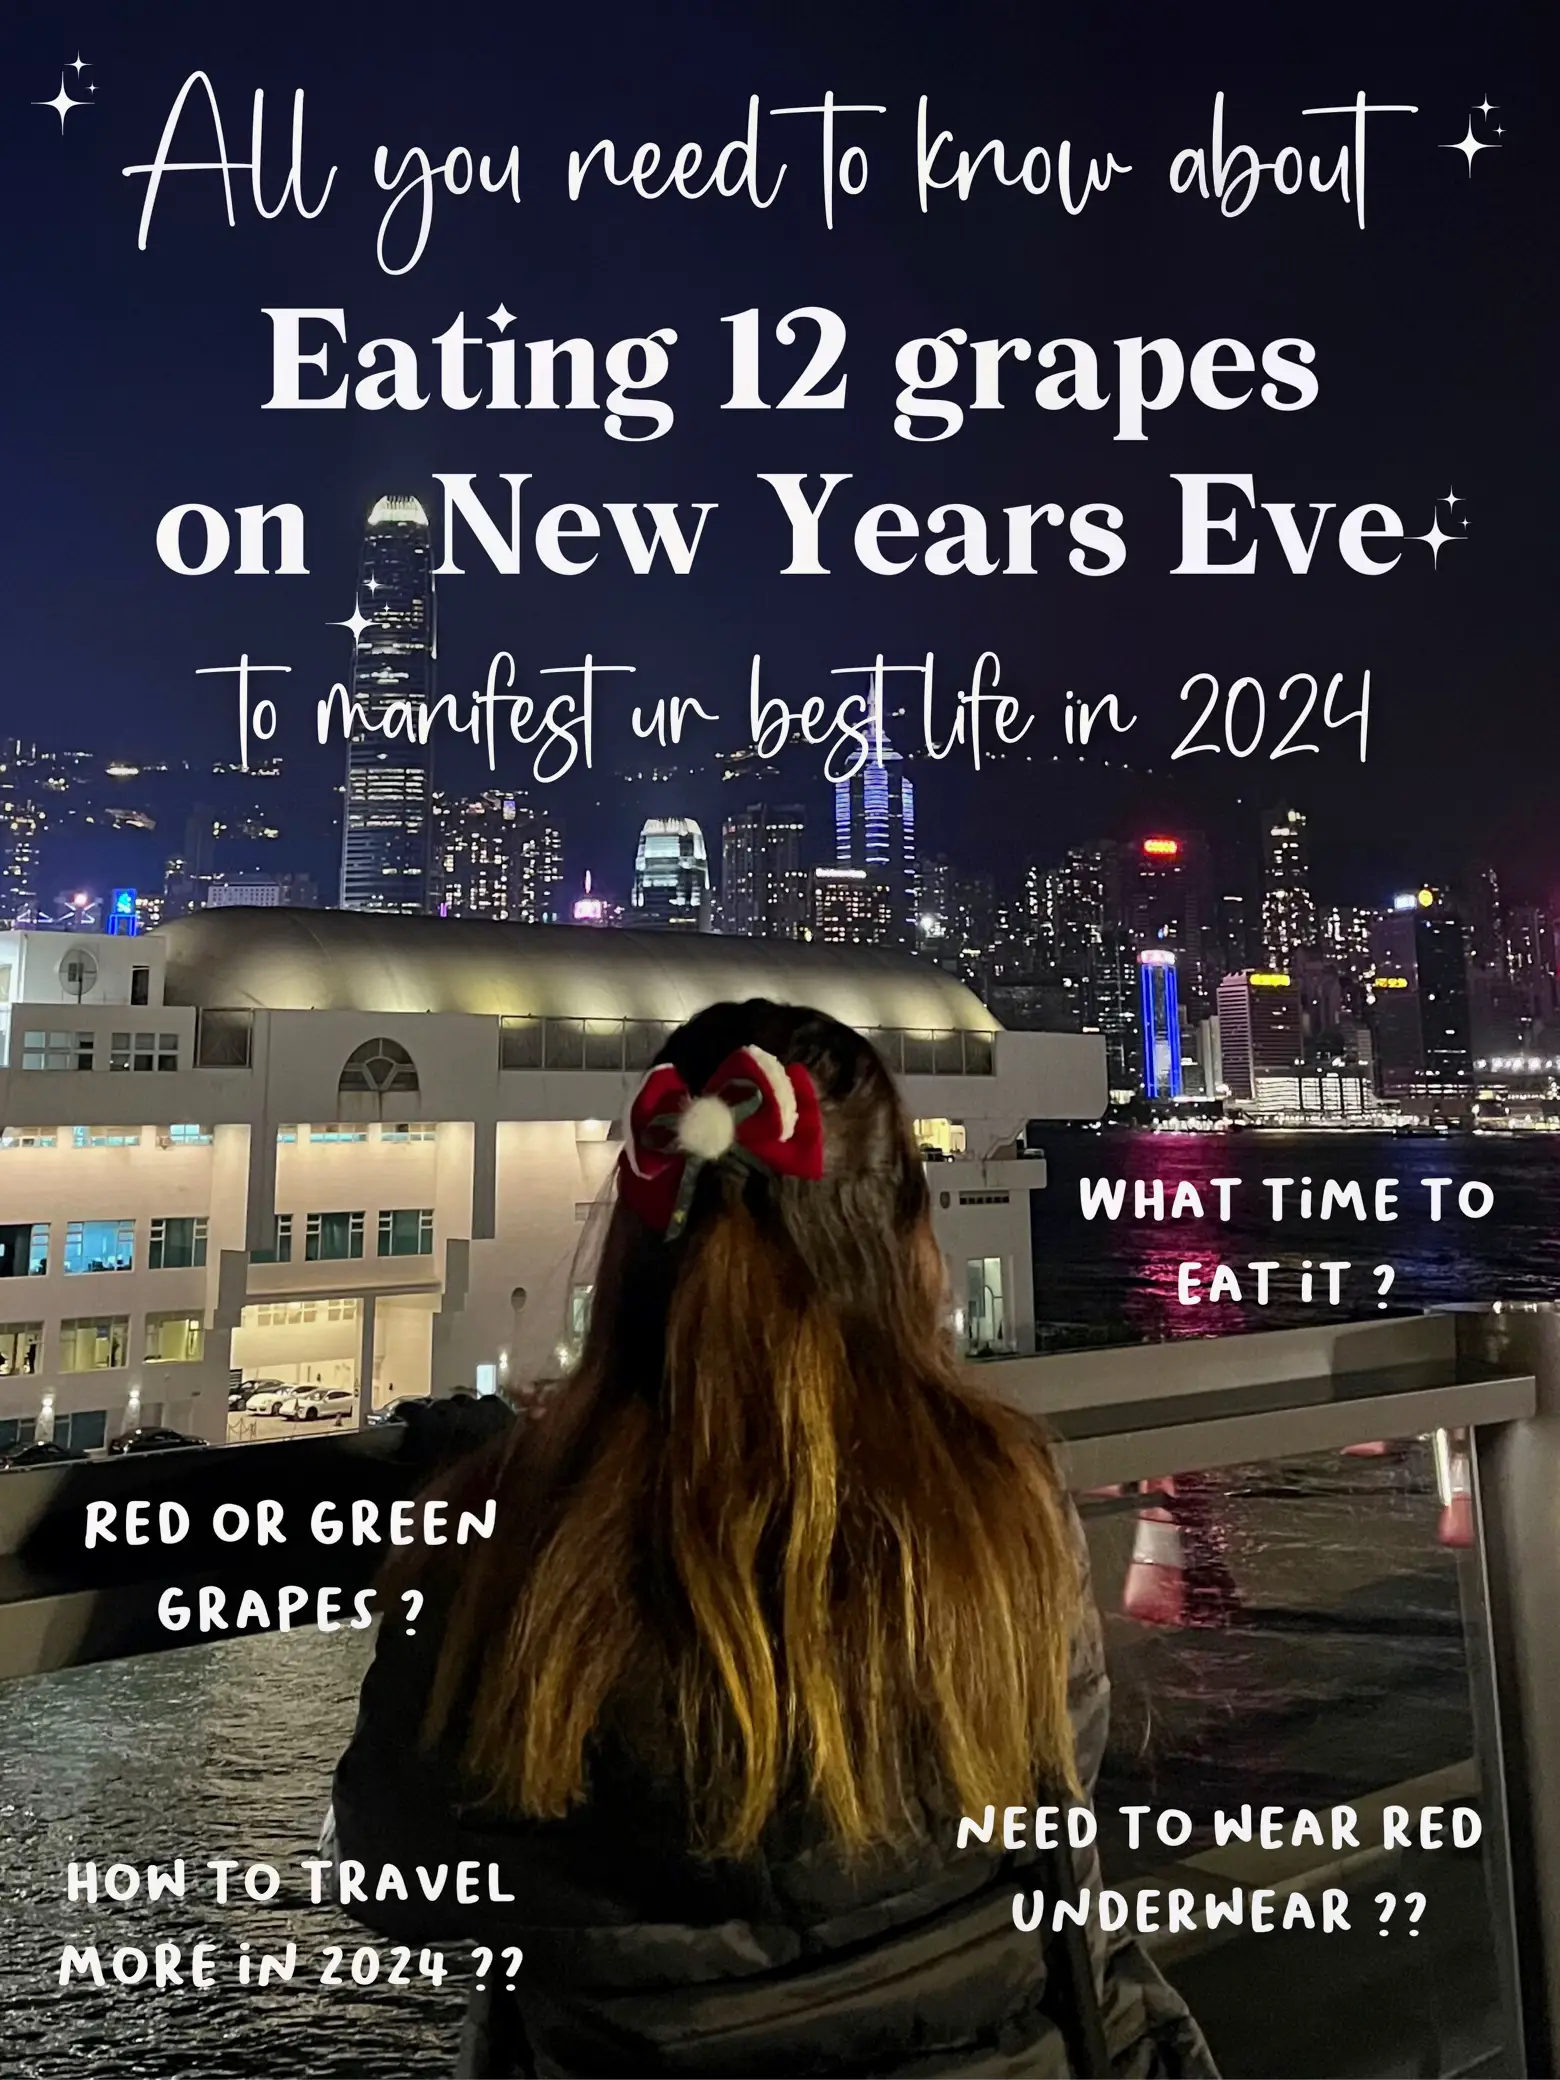 Green Grapes And Red Underwear: A Spanish New Year's Eve : The